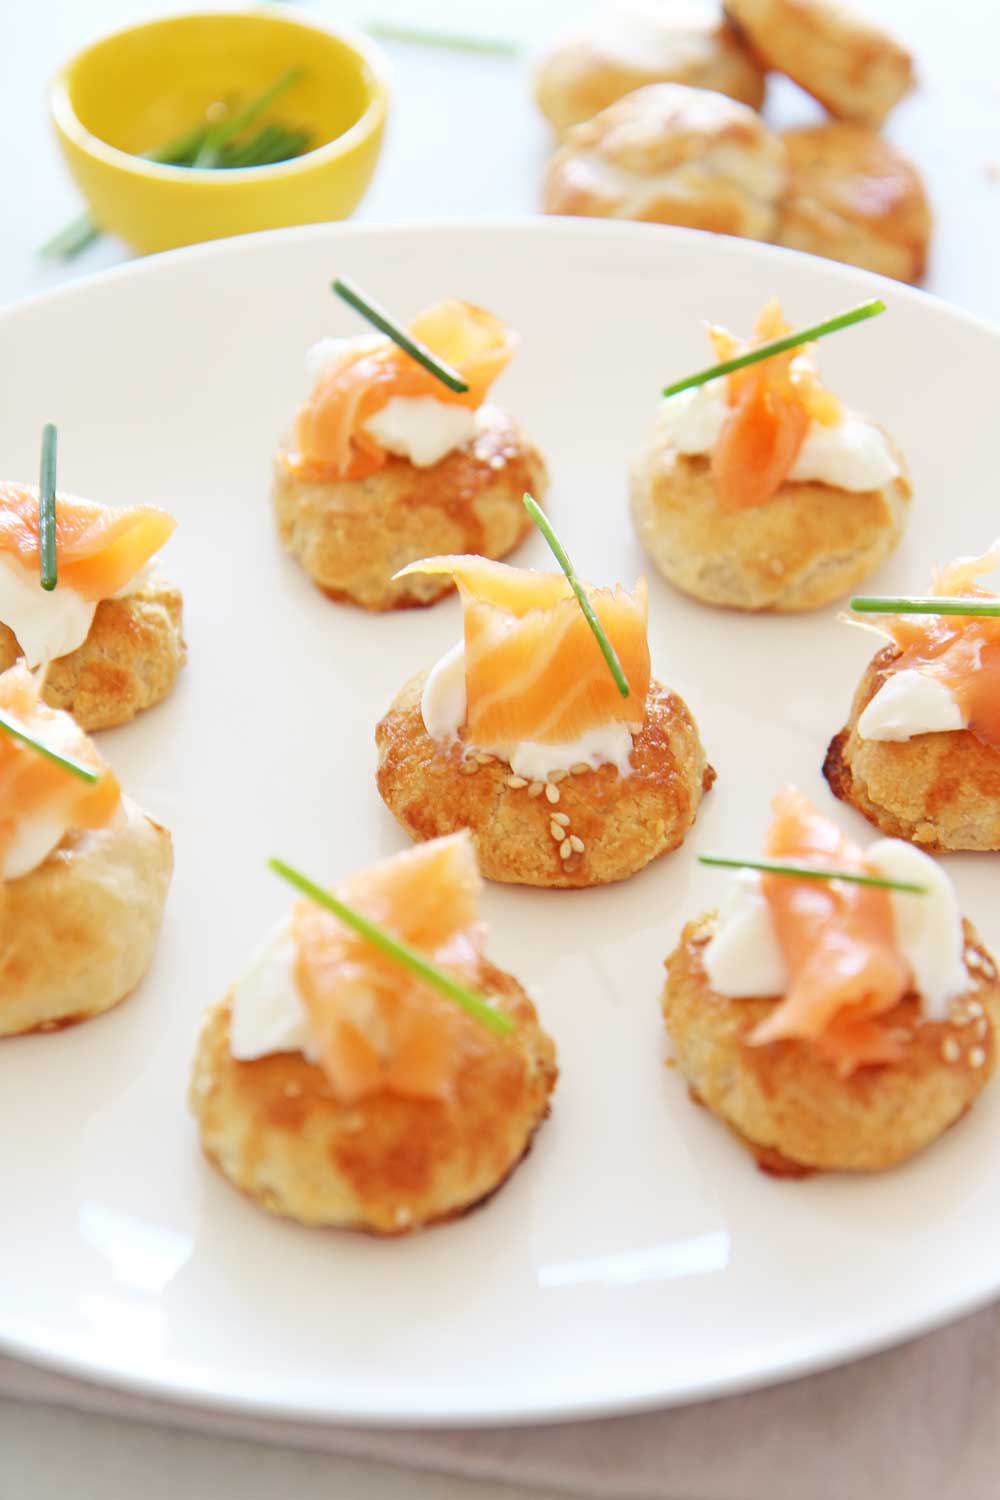 Lox and Potato Knish Recipe. This is potato knish, lox, sour cream, and chives. This is the perfect New Years appetizer, Holiday appetizer, or game night eats. This is super easy. Happy Cooking! www.ChopHappy.com